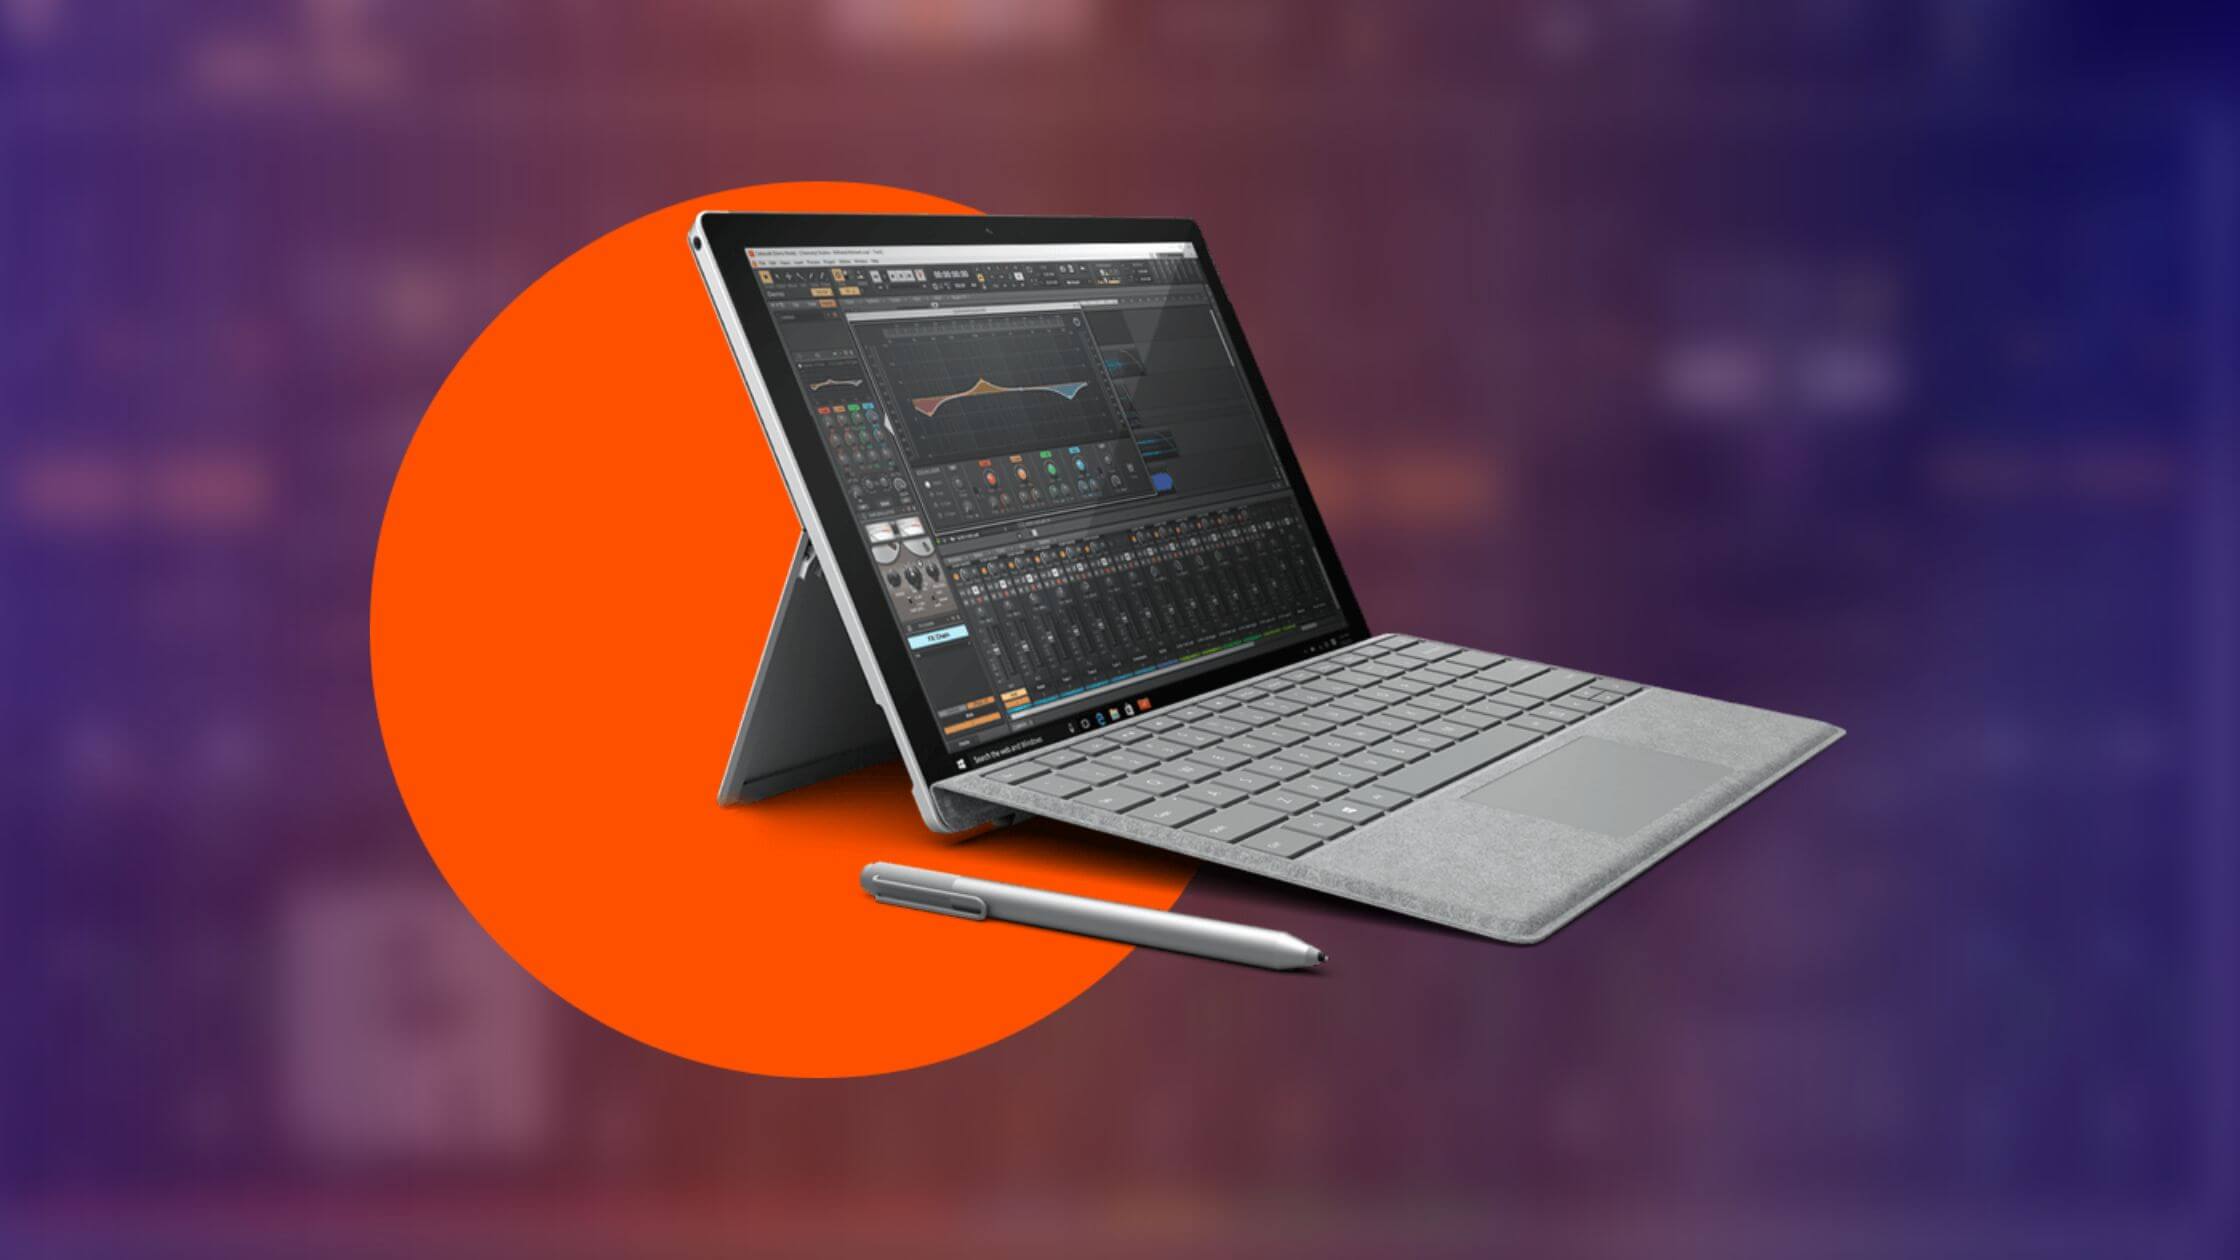 Cakewalk by BandLab is to be replaced by Cakewalk Sonar & Cakewalk Next with macOS compatibility